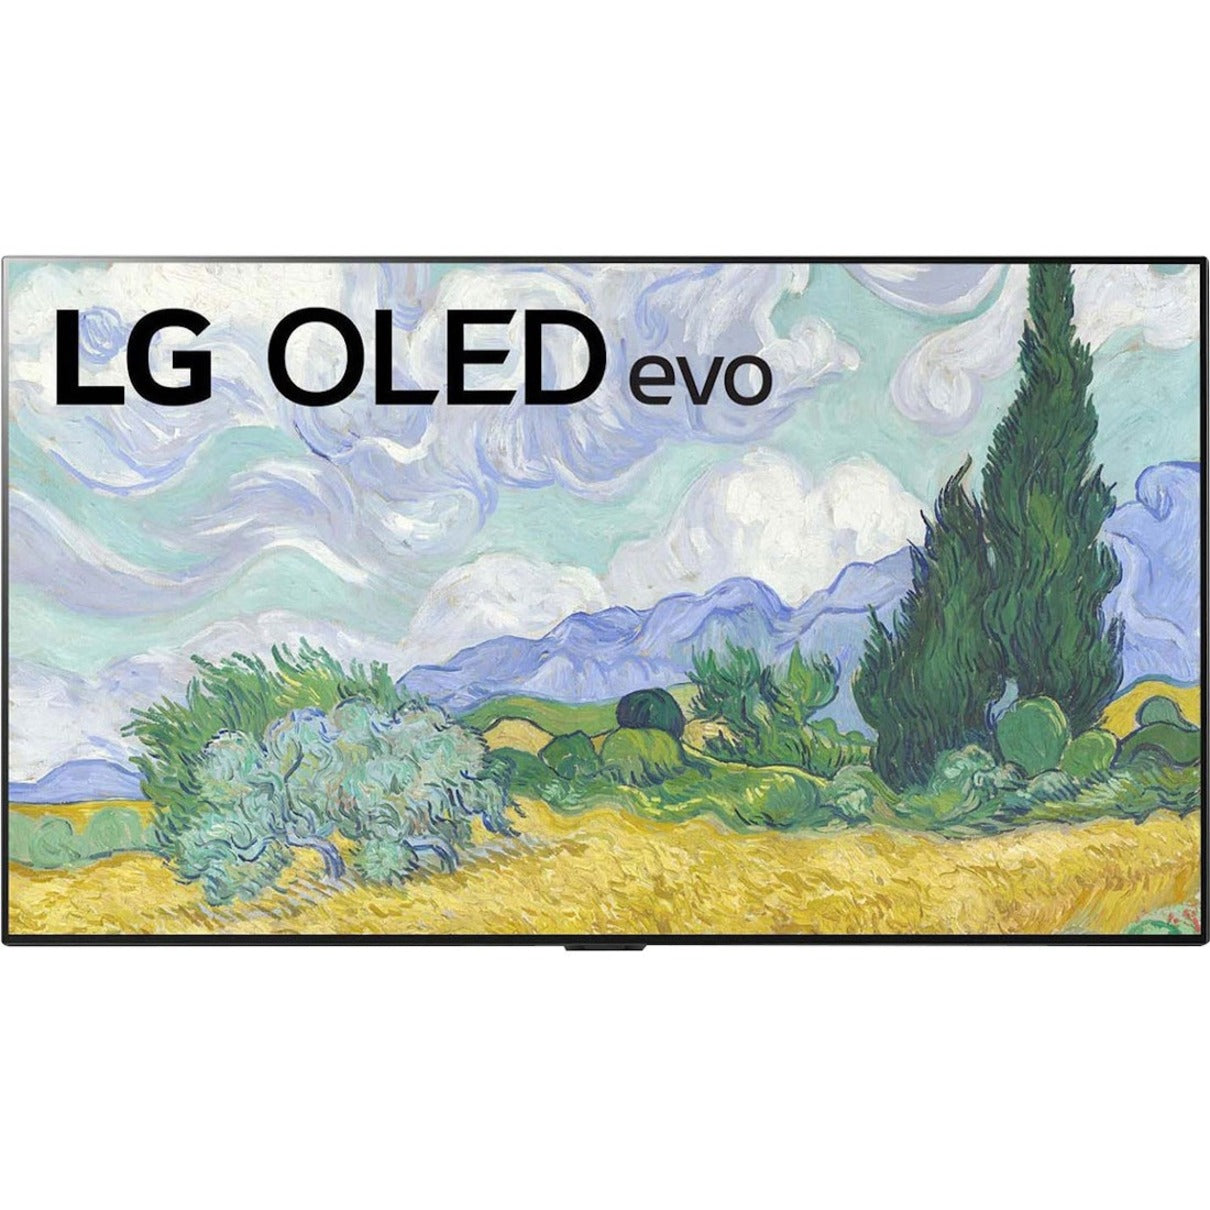 LG OLED55G1PUA Smart OLED TV 4K UHDTV, 54.6 - Dolby Atmos, 120Hz Refresh Rate, WebOS, Voice Assistant Supported